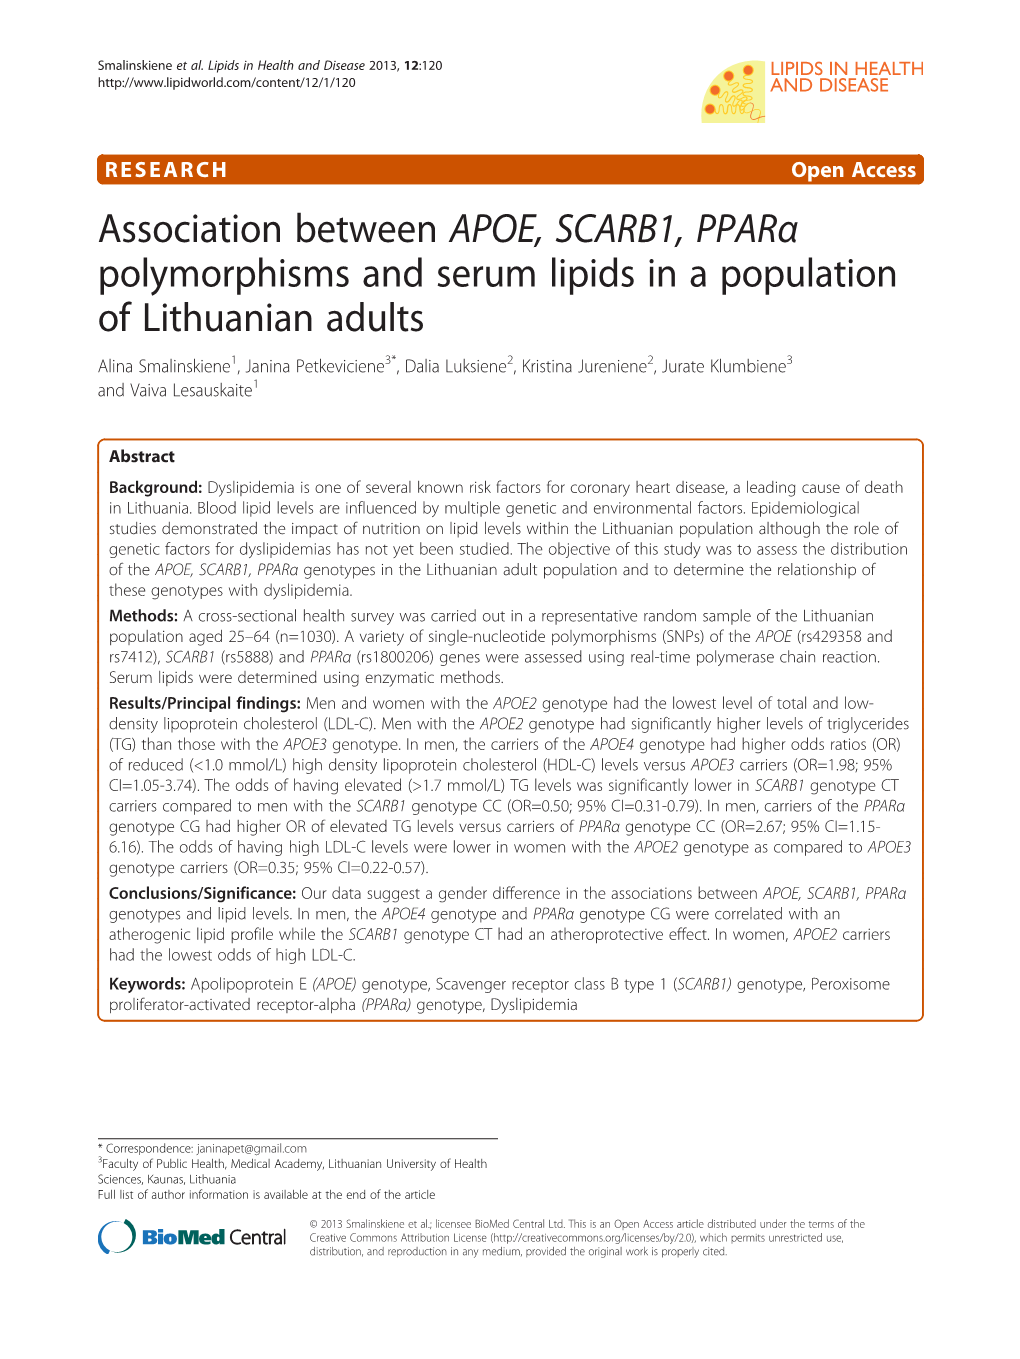 Association Between APOE, SCARB1, Pparα Polymorphisms and Serum Lipids in a Population of Lithuanian Adults